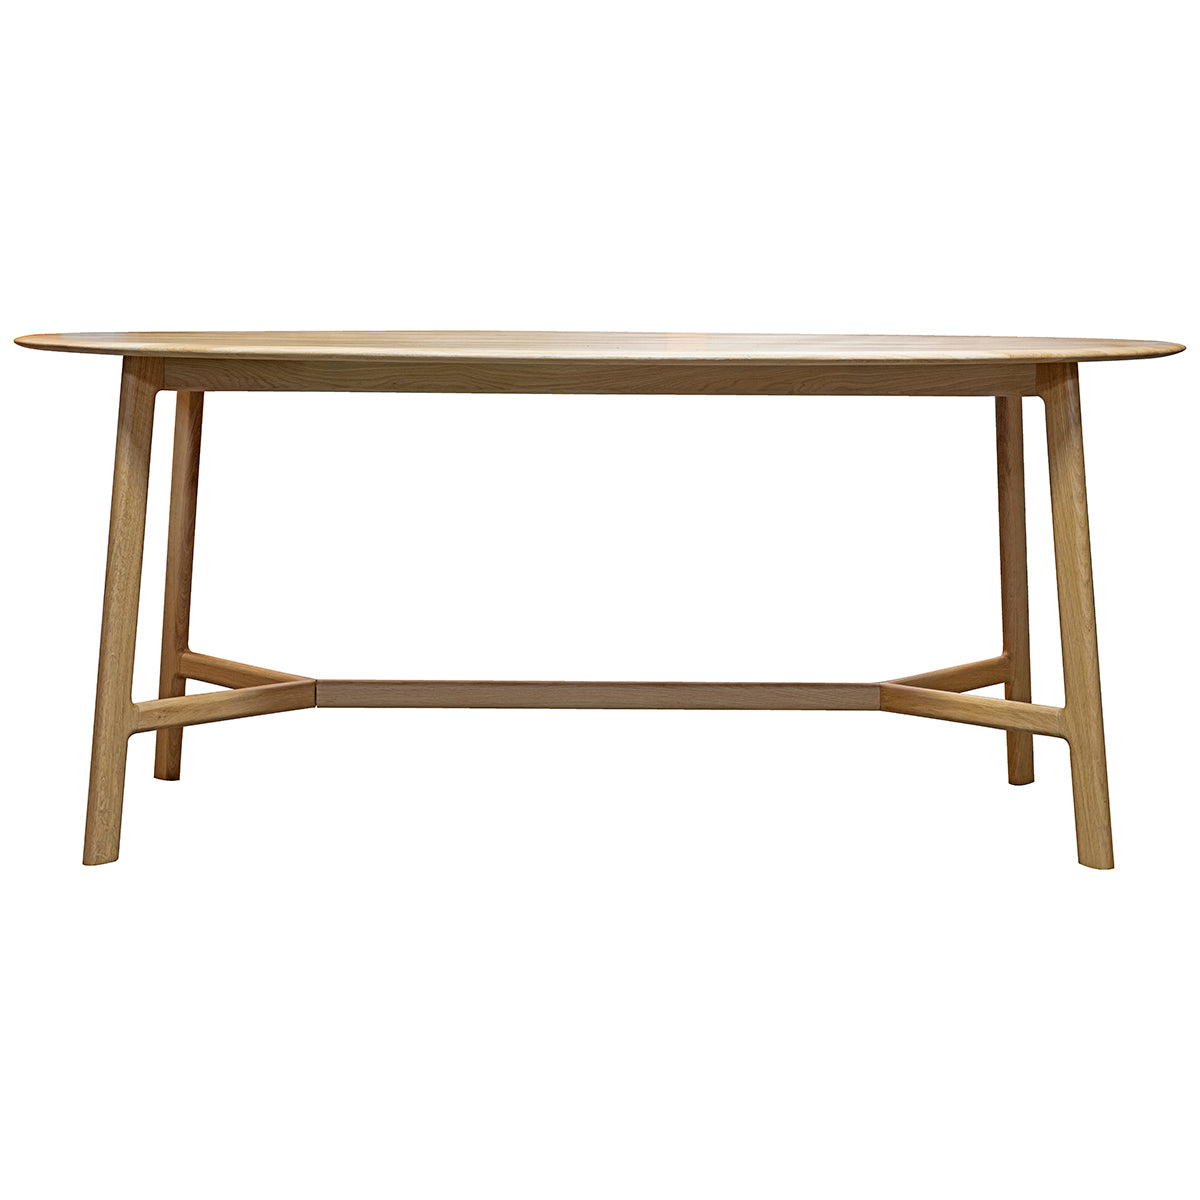 Load image into Gallery viewer, A wooden top Oval Dining Table from Kikiathome.co.uk for interior decor.
